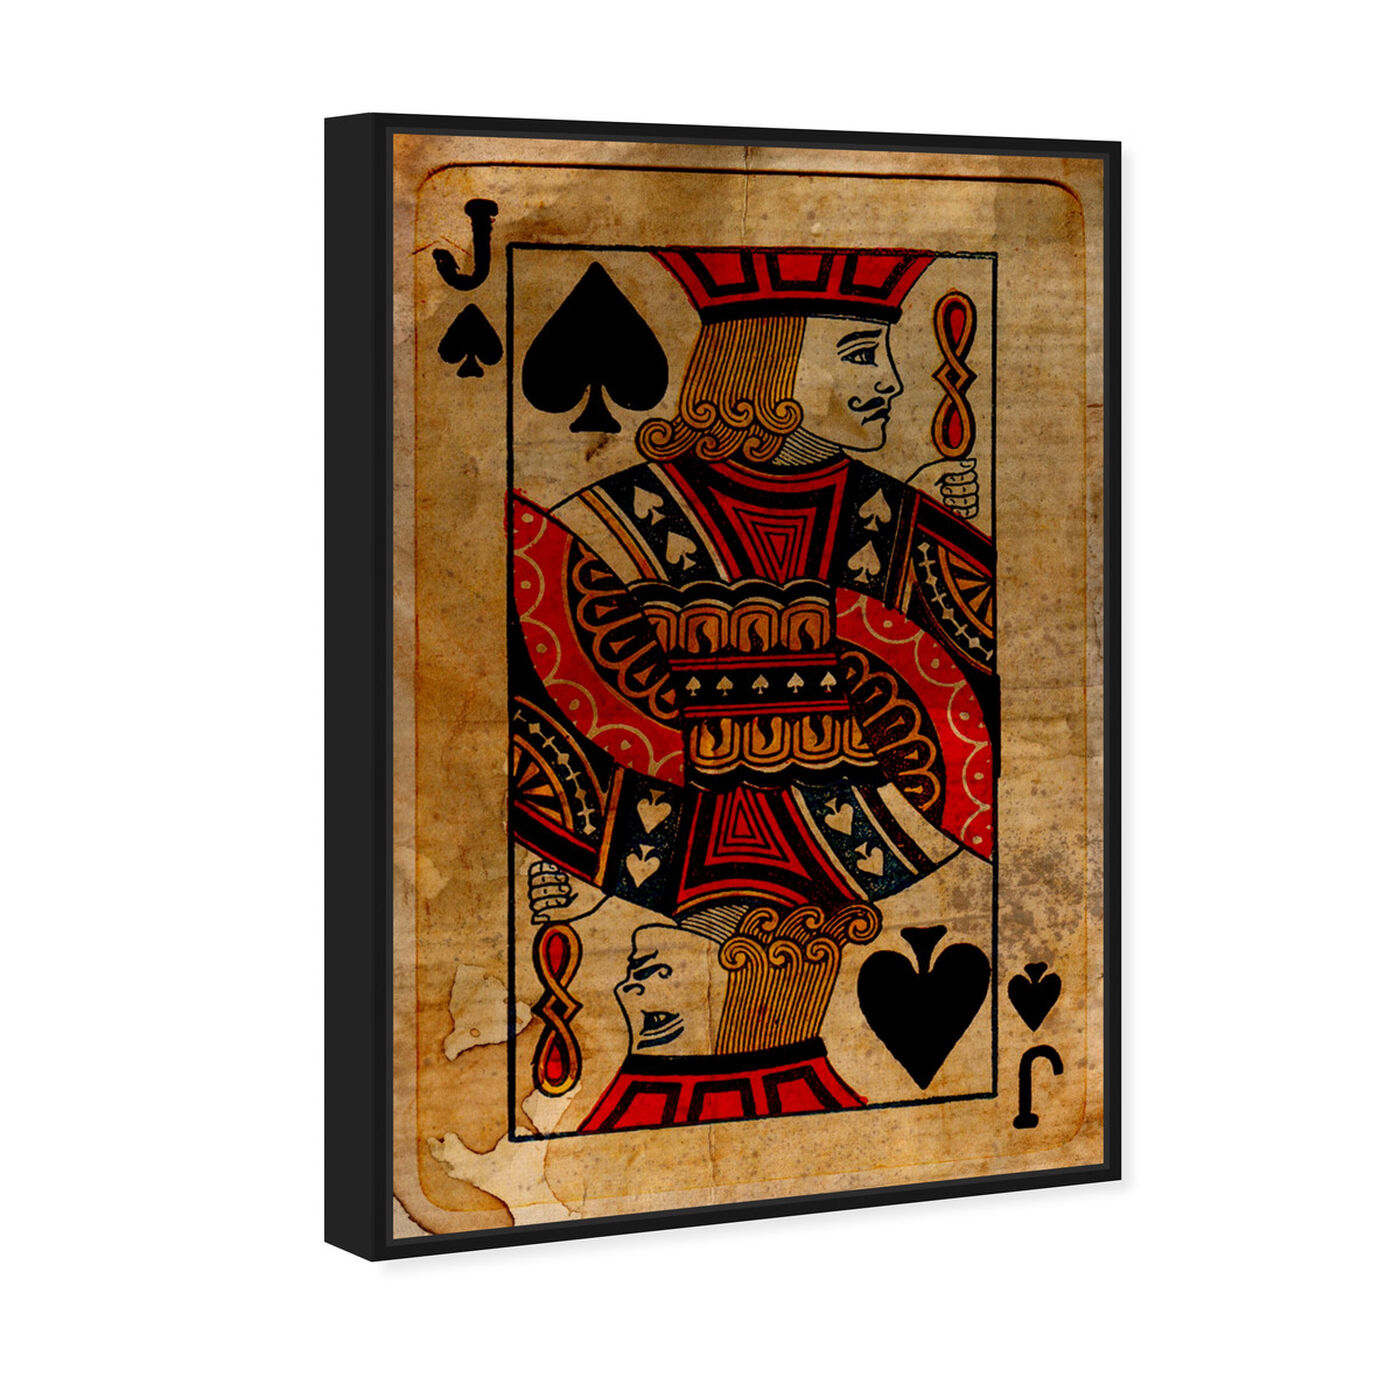 Angled view of Jack of Spades featuring entertainment and hobbies and playing cards art.